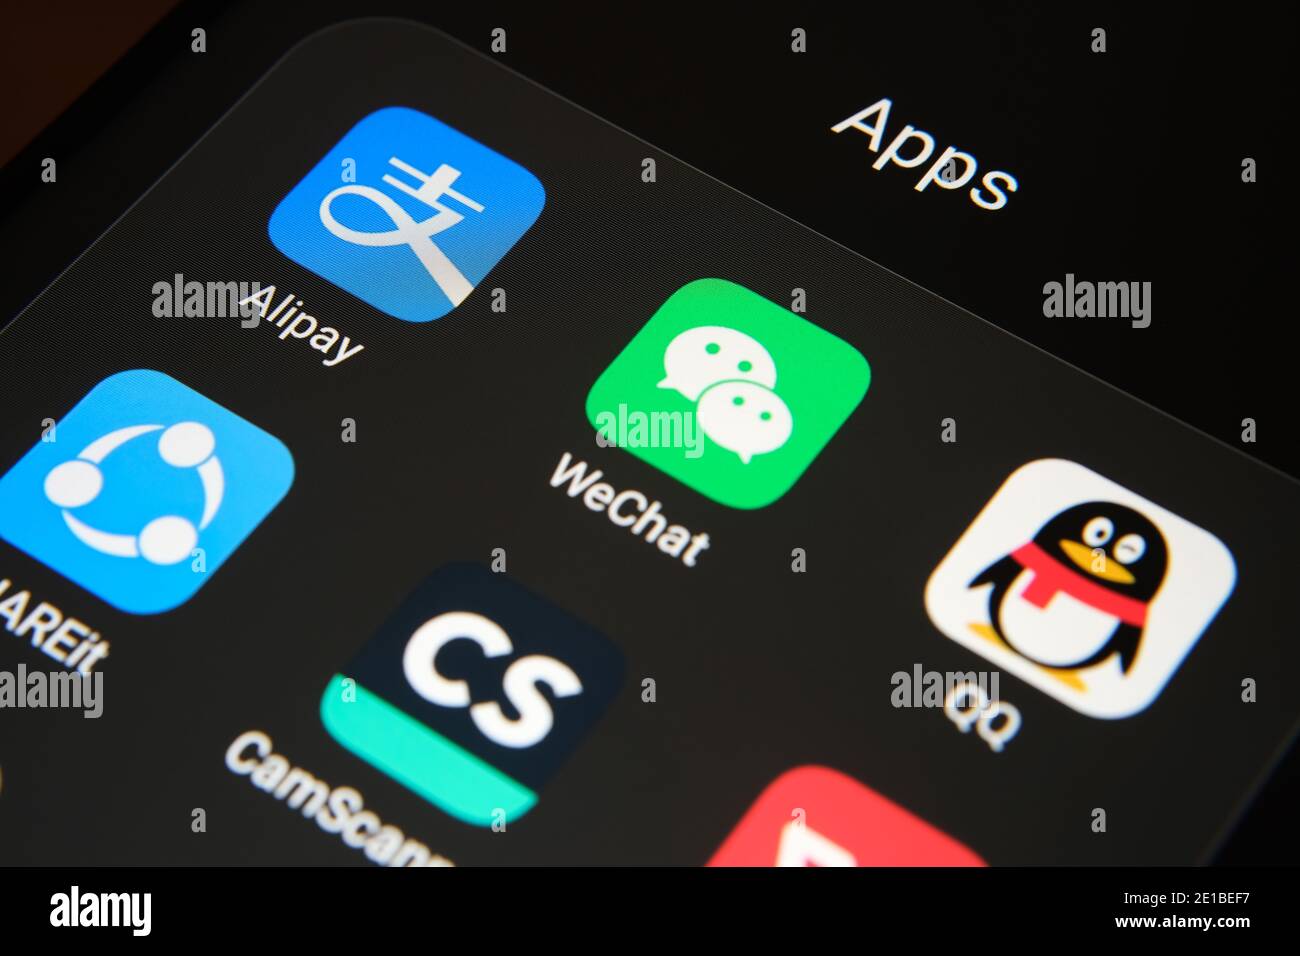 Stafford, United Kingdom - January 6 2021: Alipay, WeChat, QQ, SHAREit, CamScanner, WPS Office apps seen on the screen of smartphone. Banned Chinese a Stock Photo